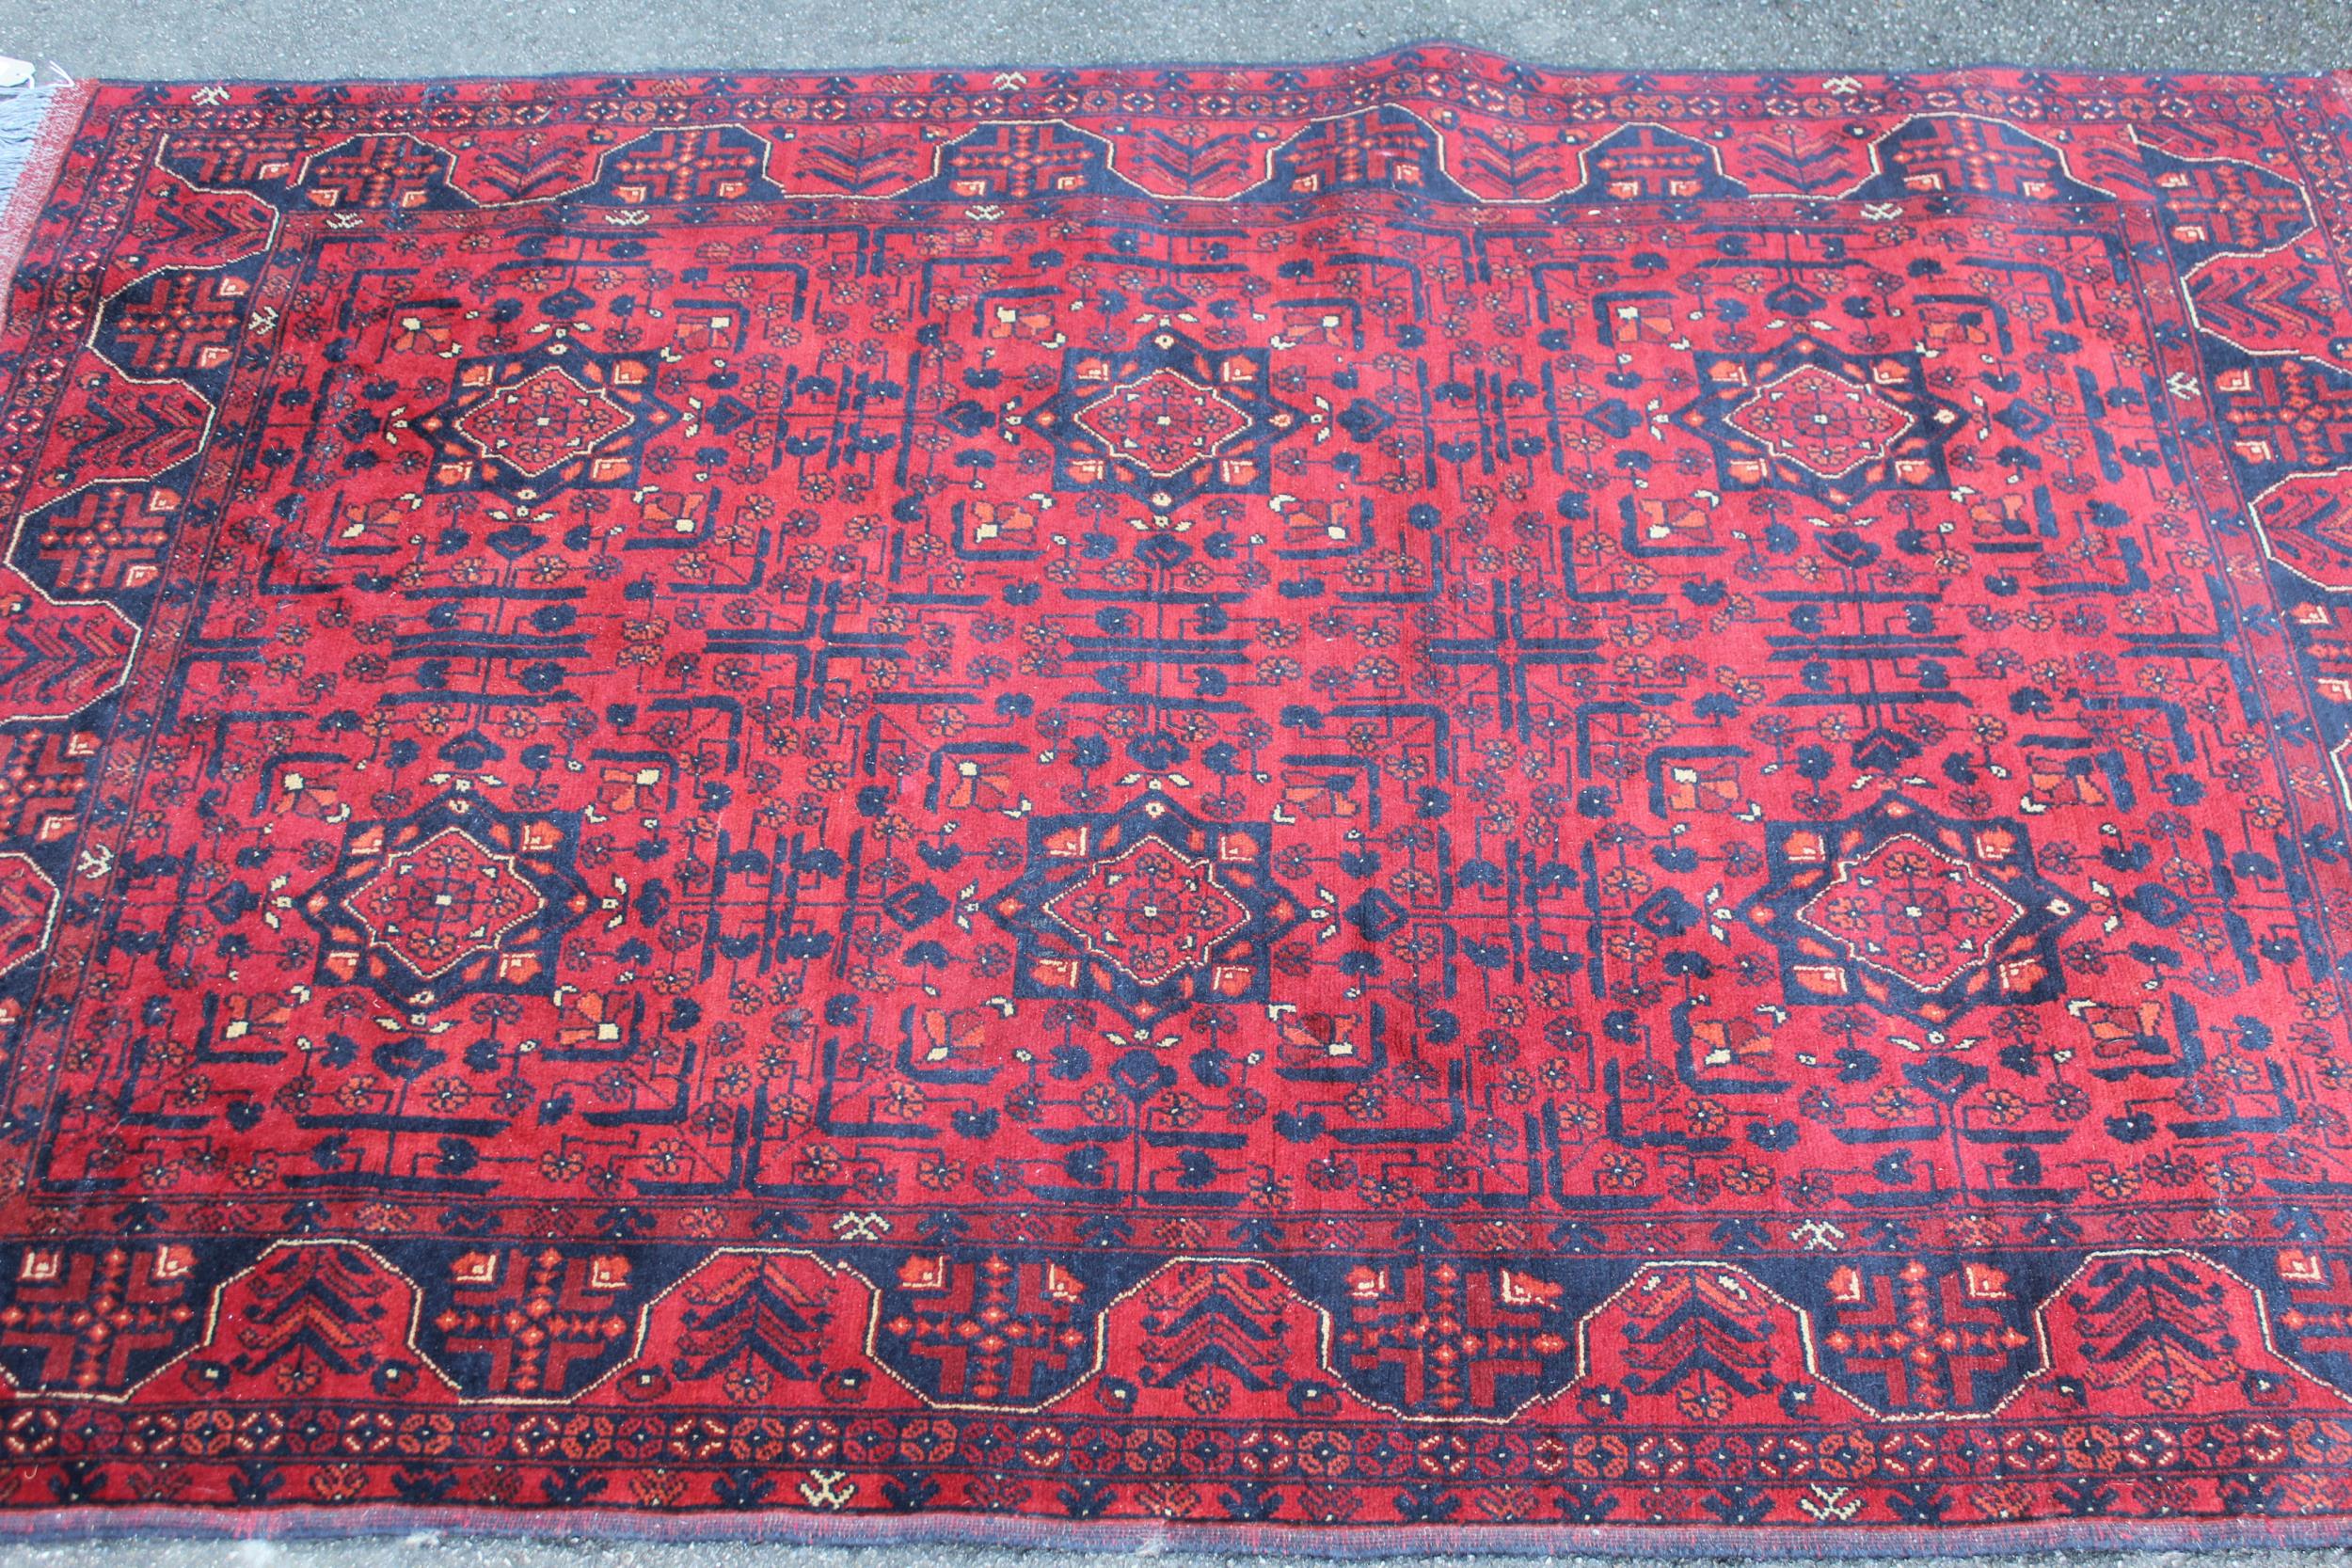 Modern Afghan Belouch rug of six panel design with a dark red ground and borders, 190 x 128cm